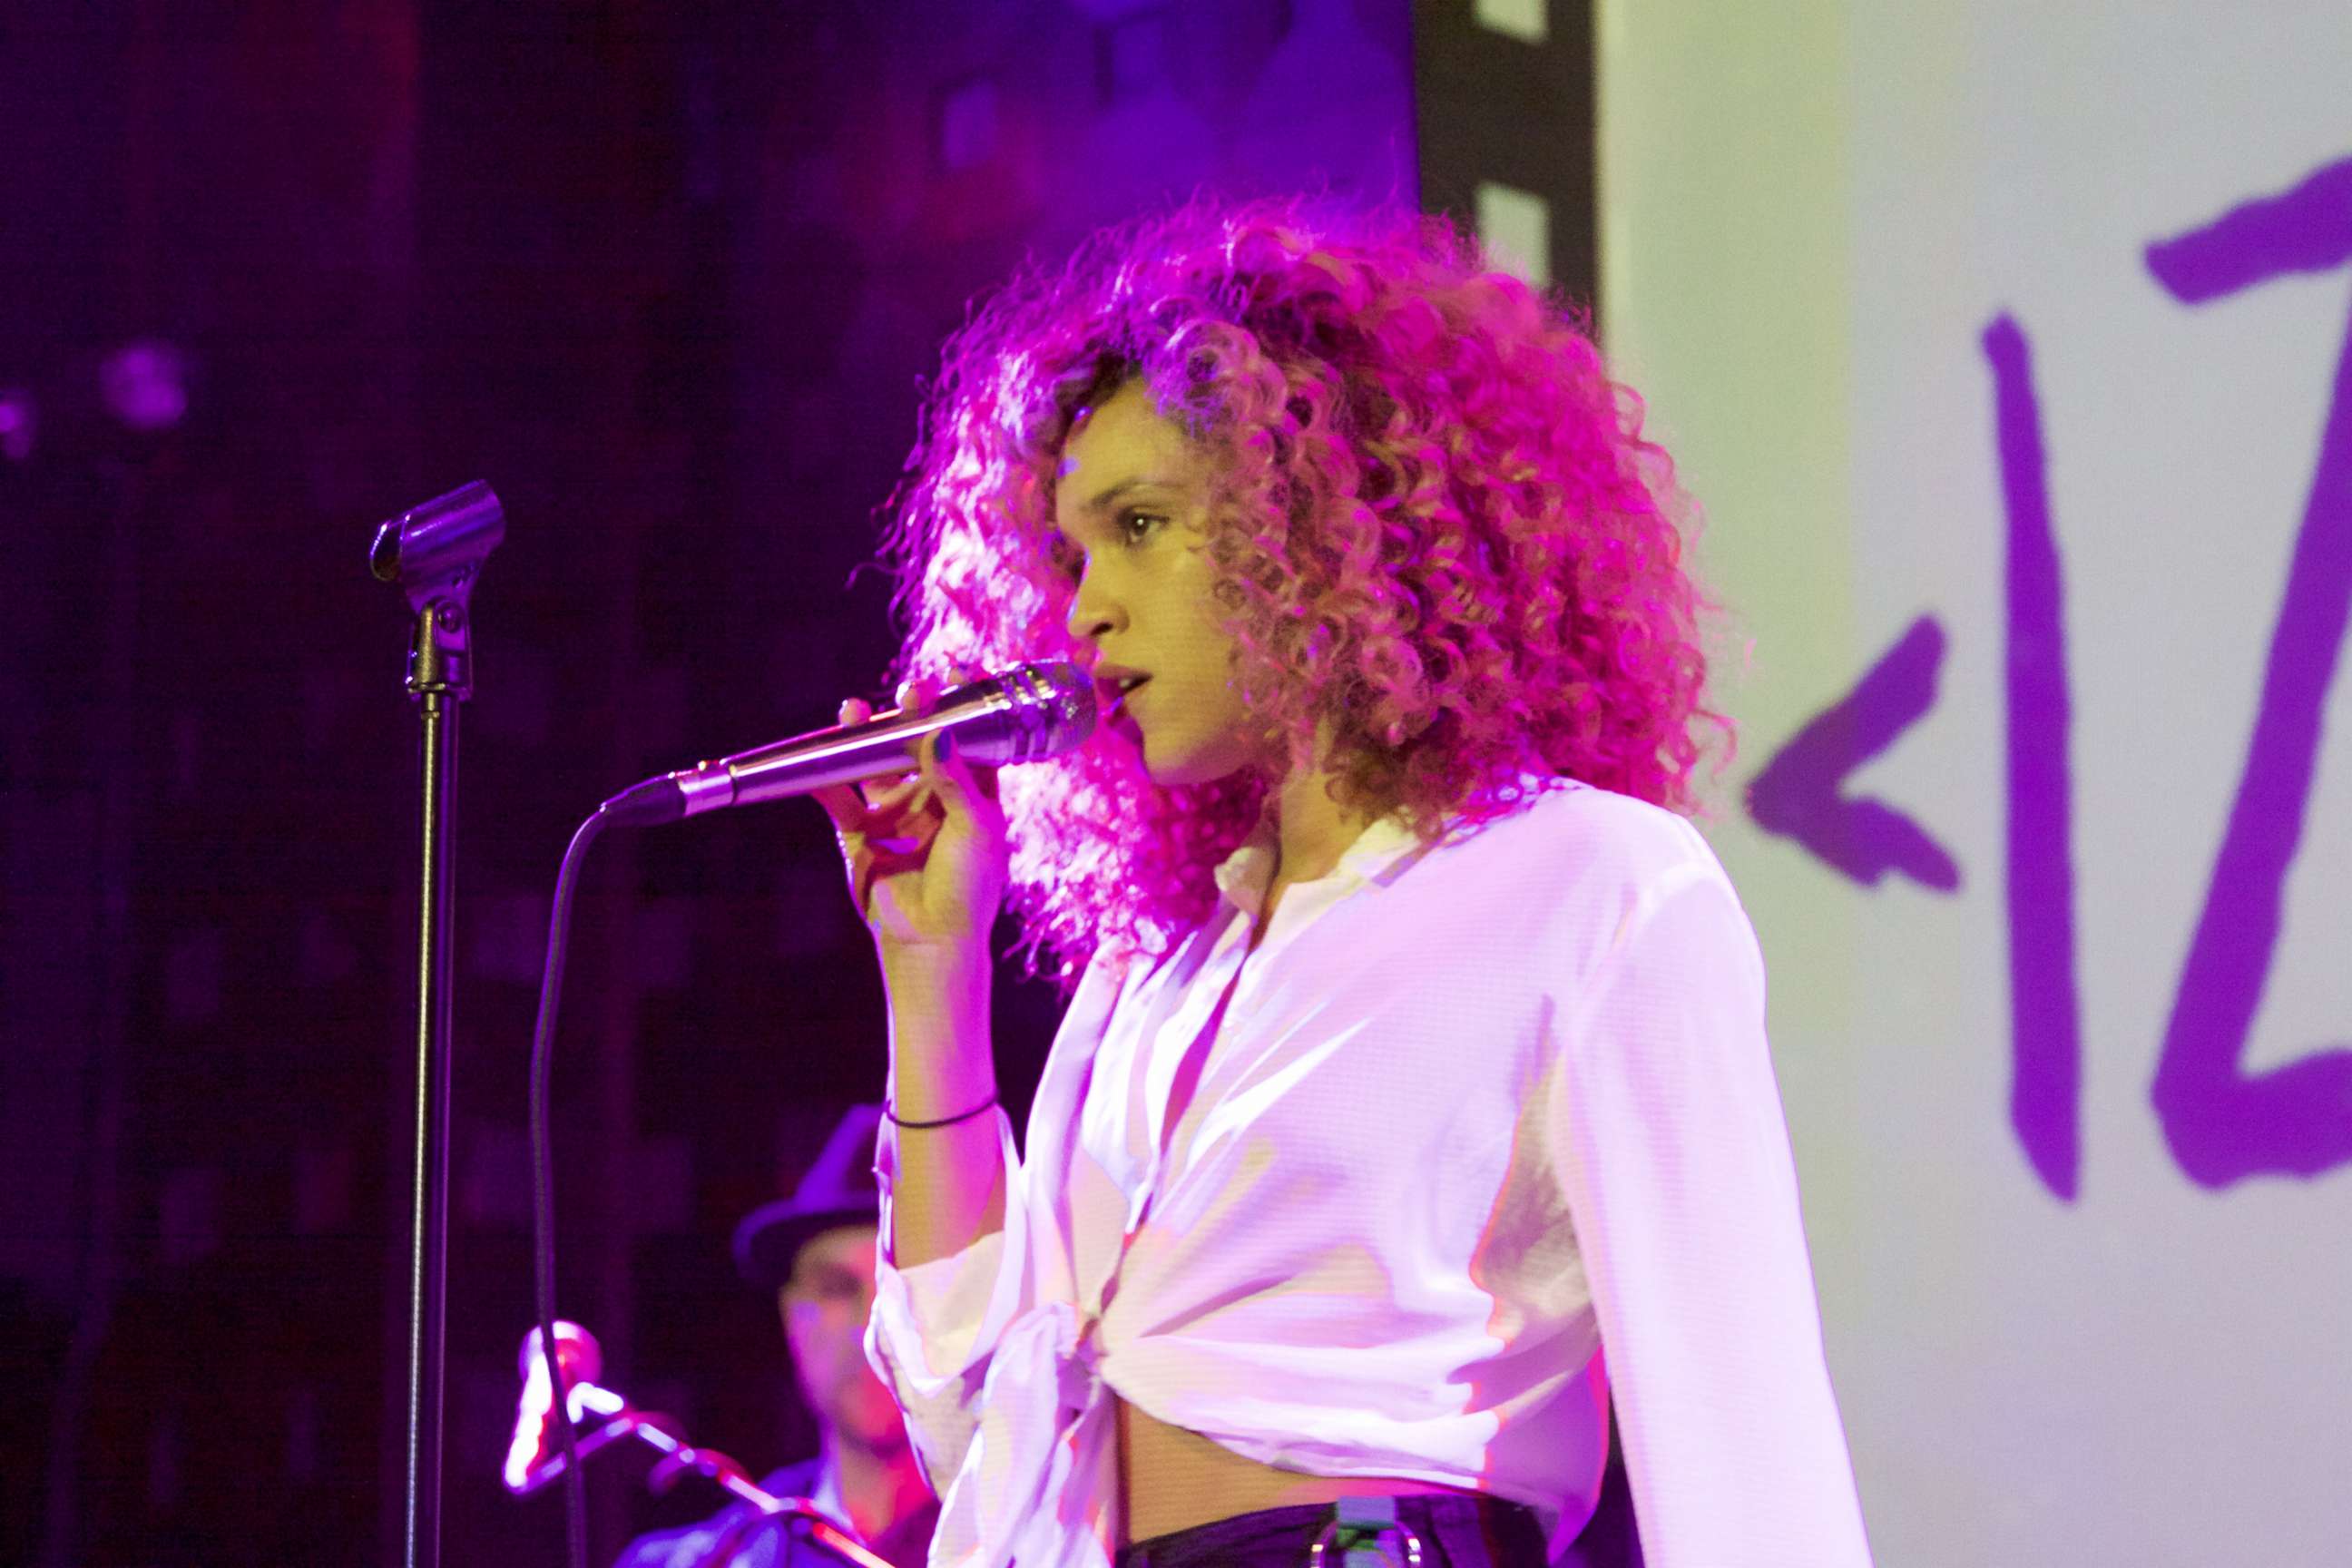 PHOTO: Izzy Bizu, pictured performing at Sounds of Brazil in New York City on Nov. 9, 2017, said she developed a love for music while at boarding school.